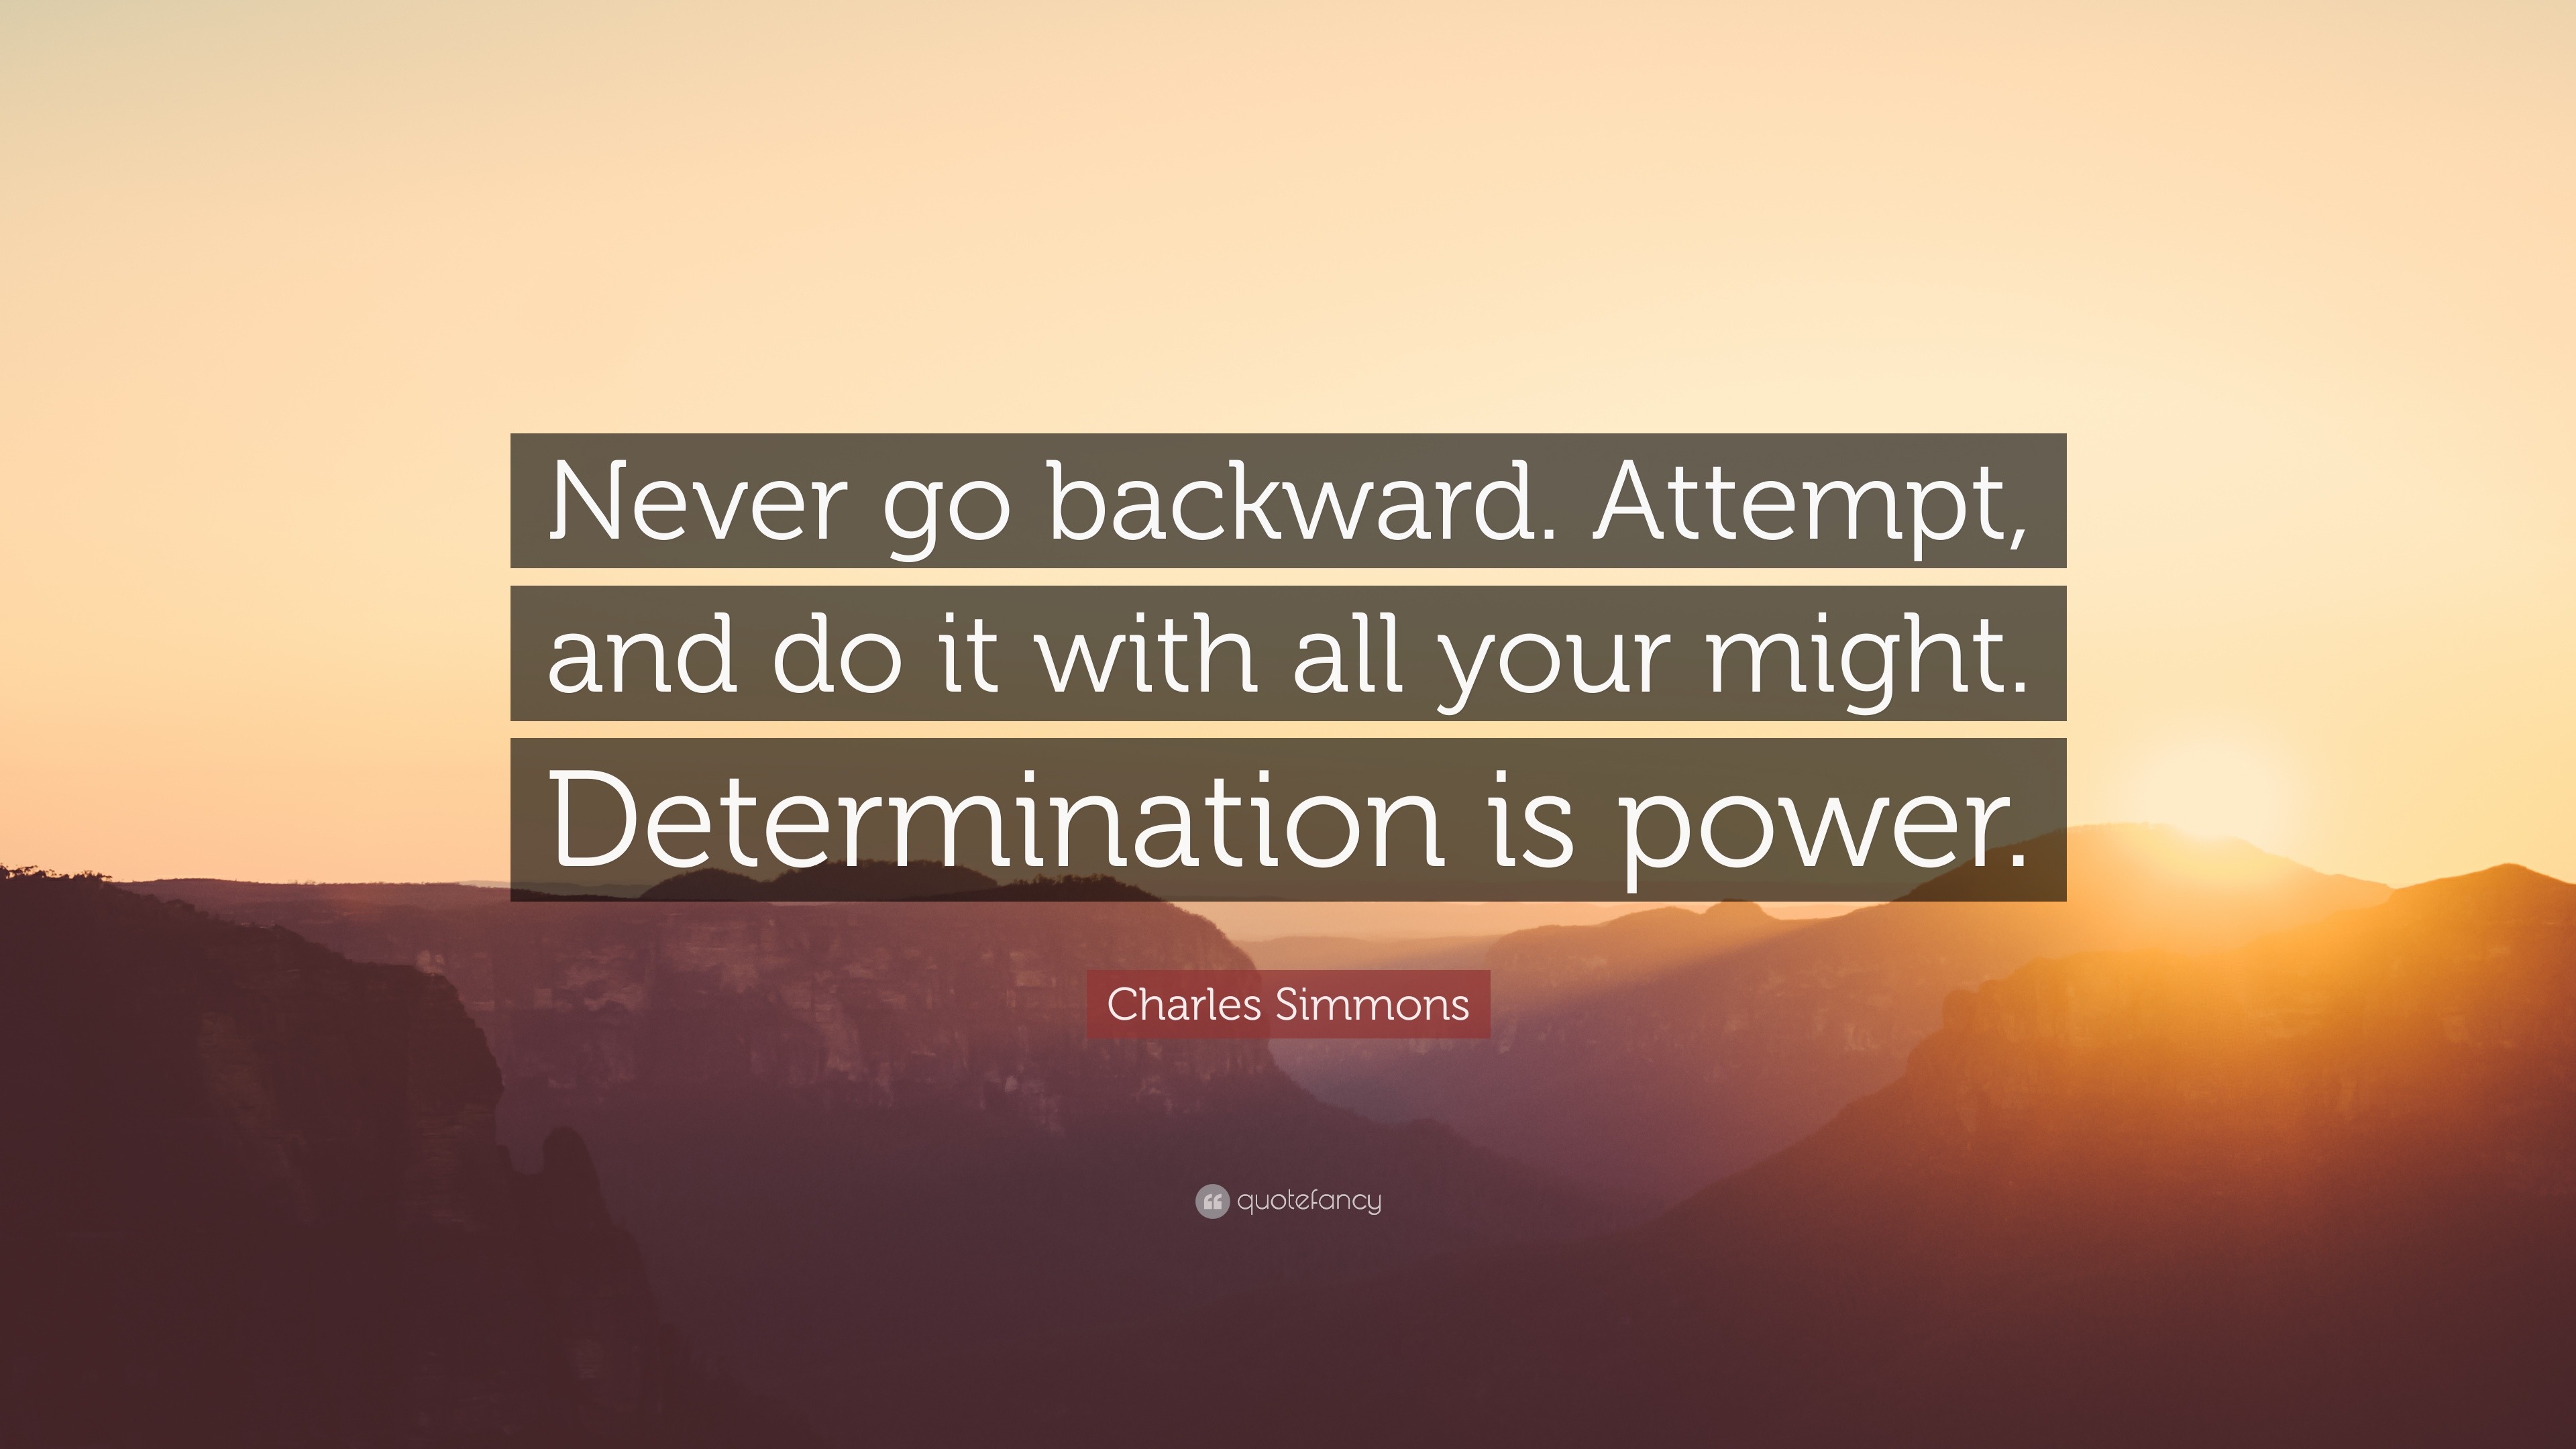 Charles Simmons Quote: “Never go backward. Attempt, and do it with all ...